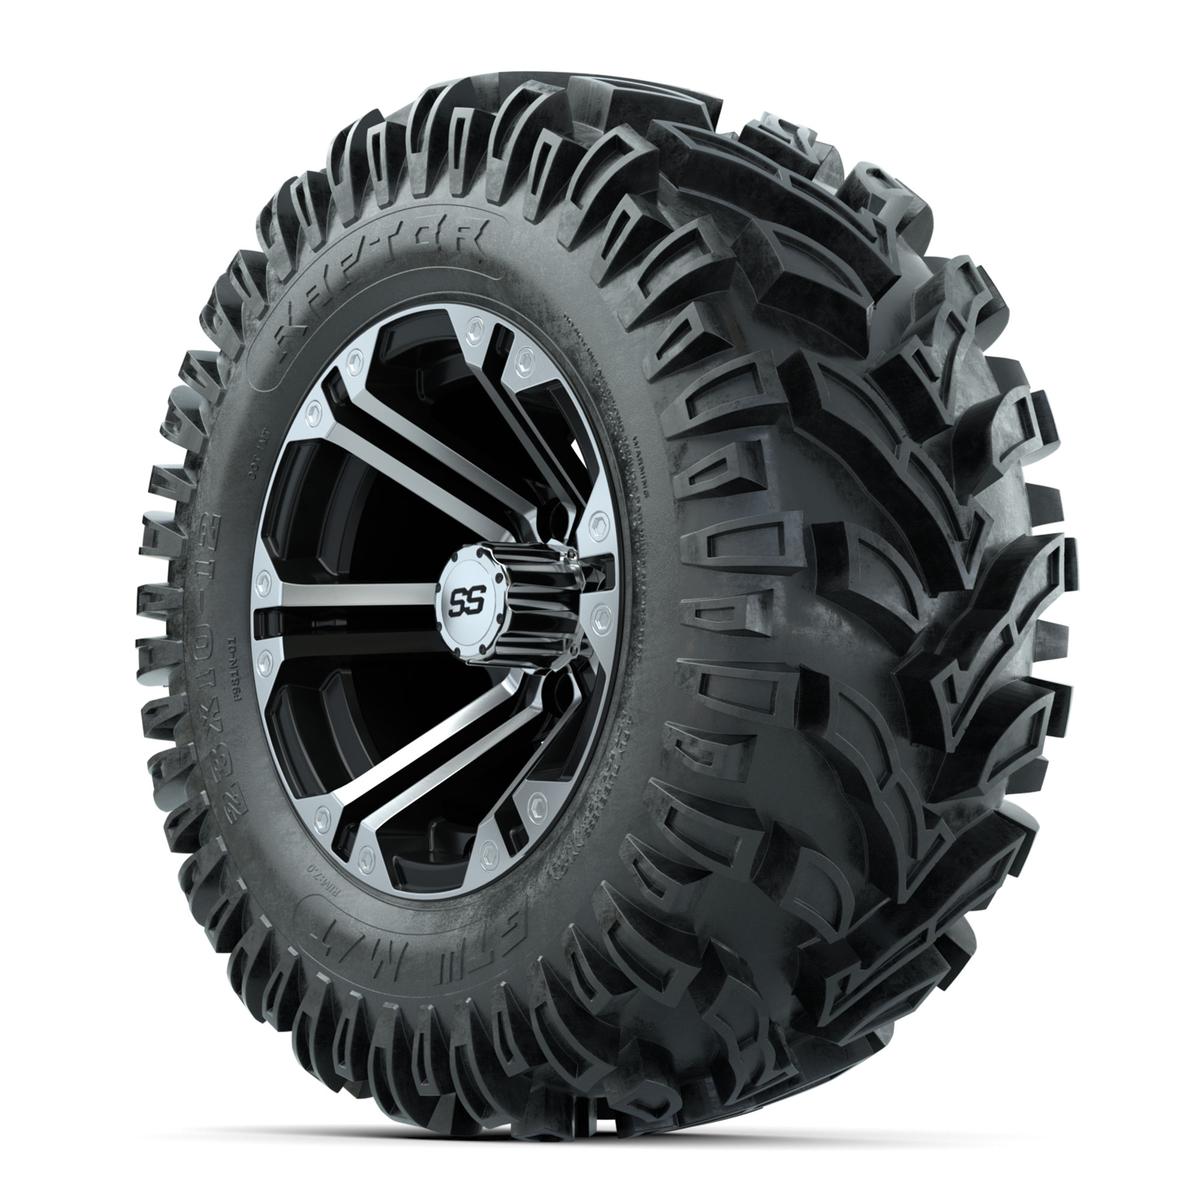 12” GTW Specter Black and Machined Wheels with 23” Raptor Mud Tires – Set of 4